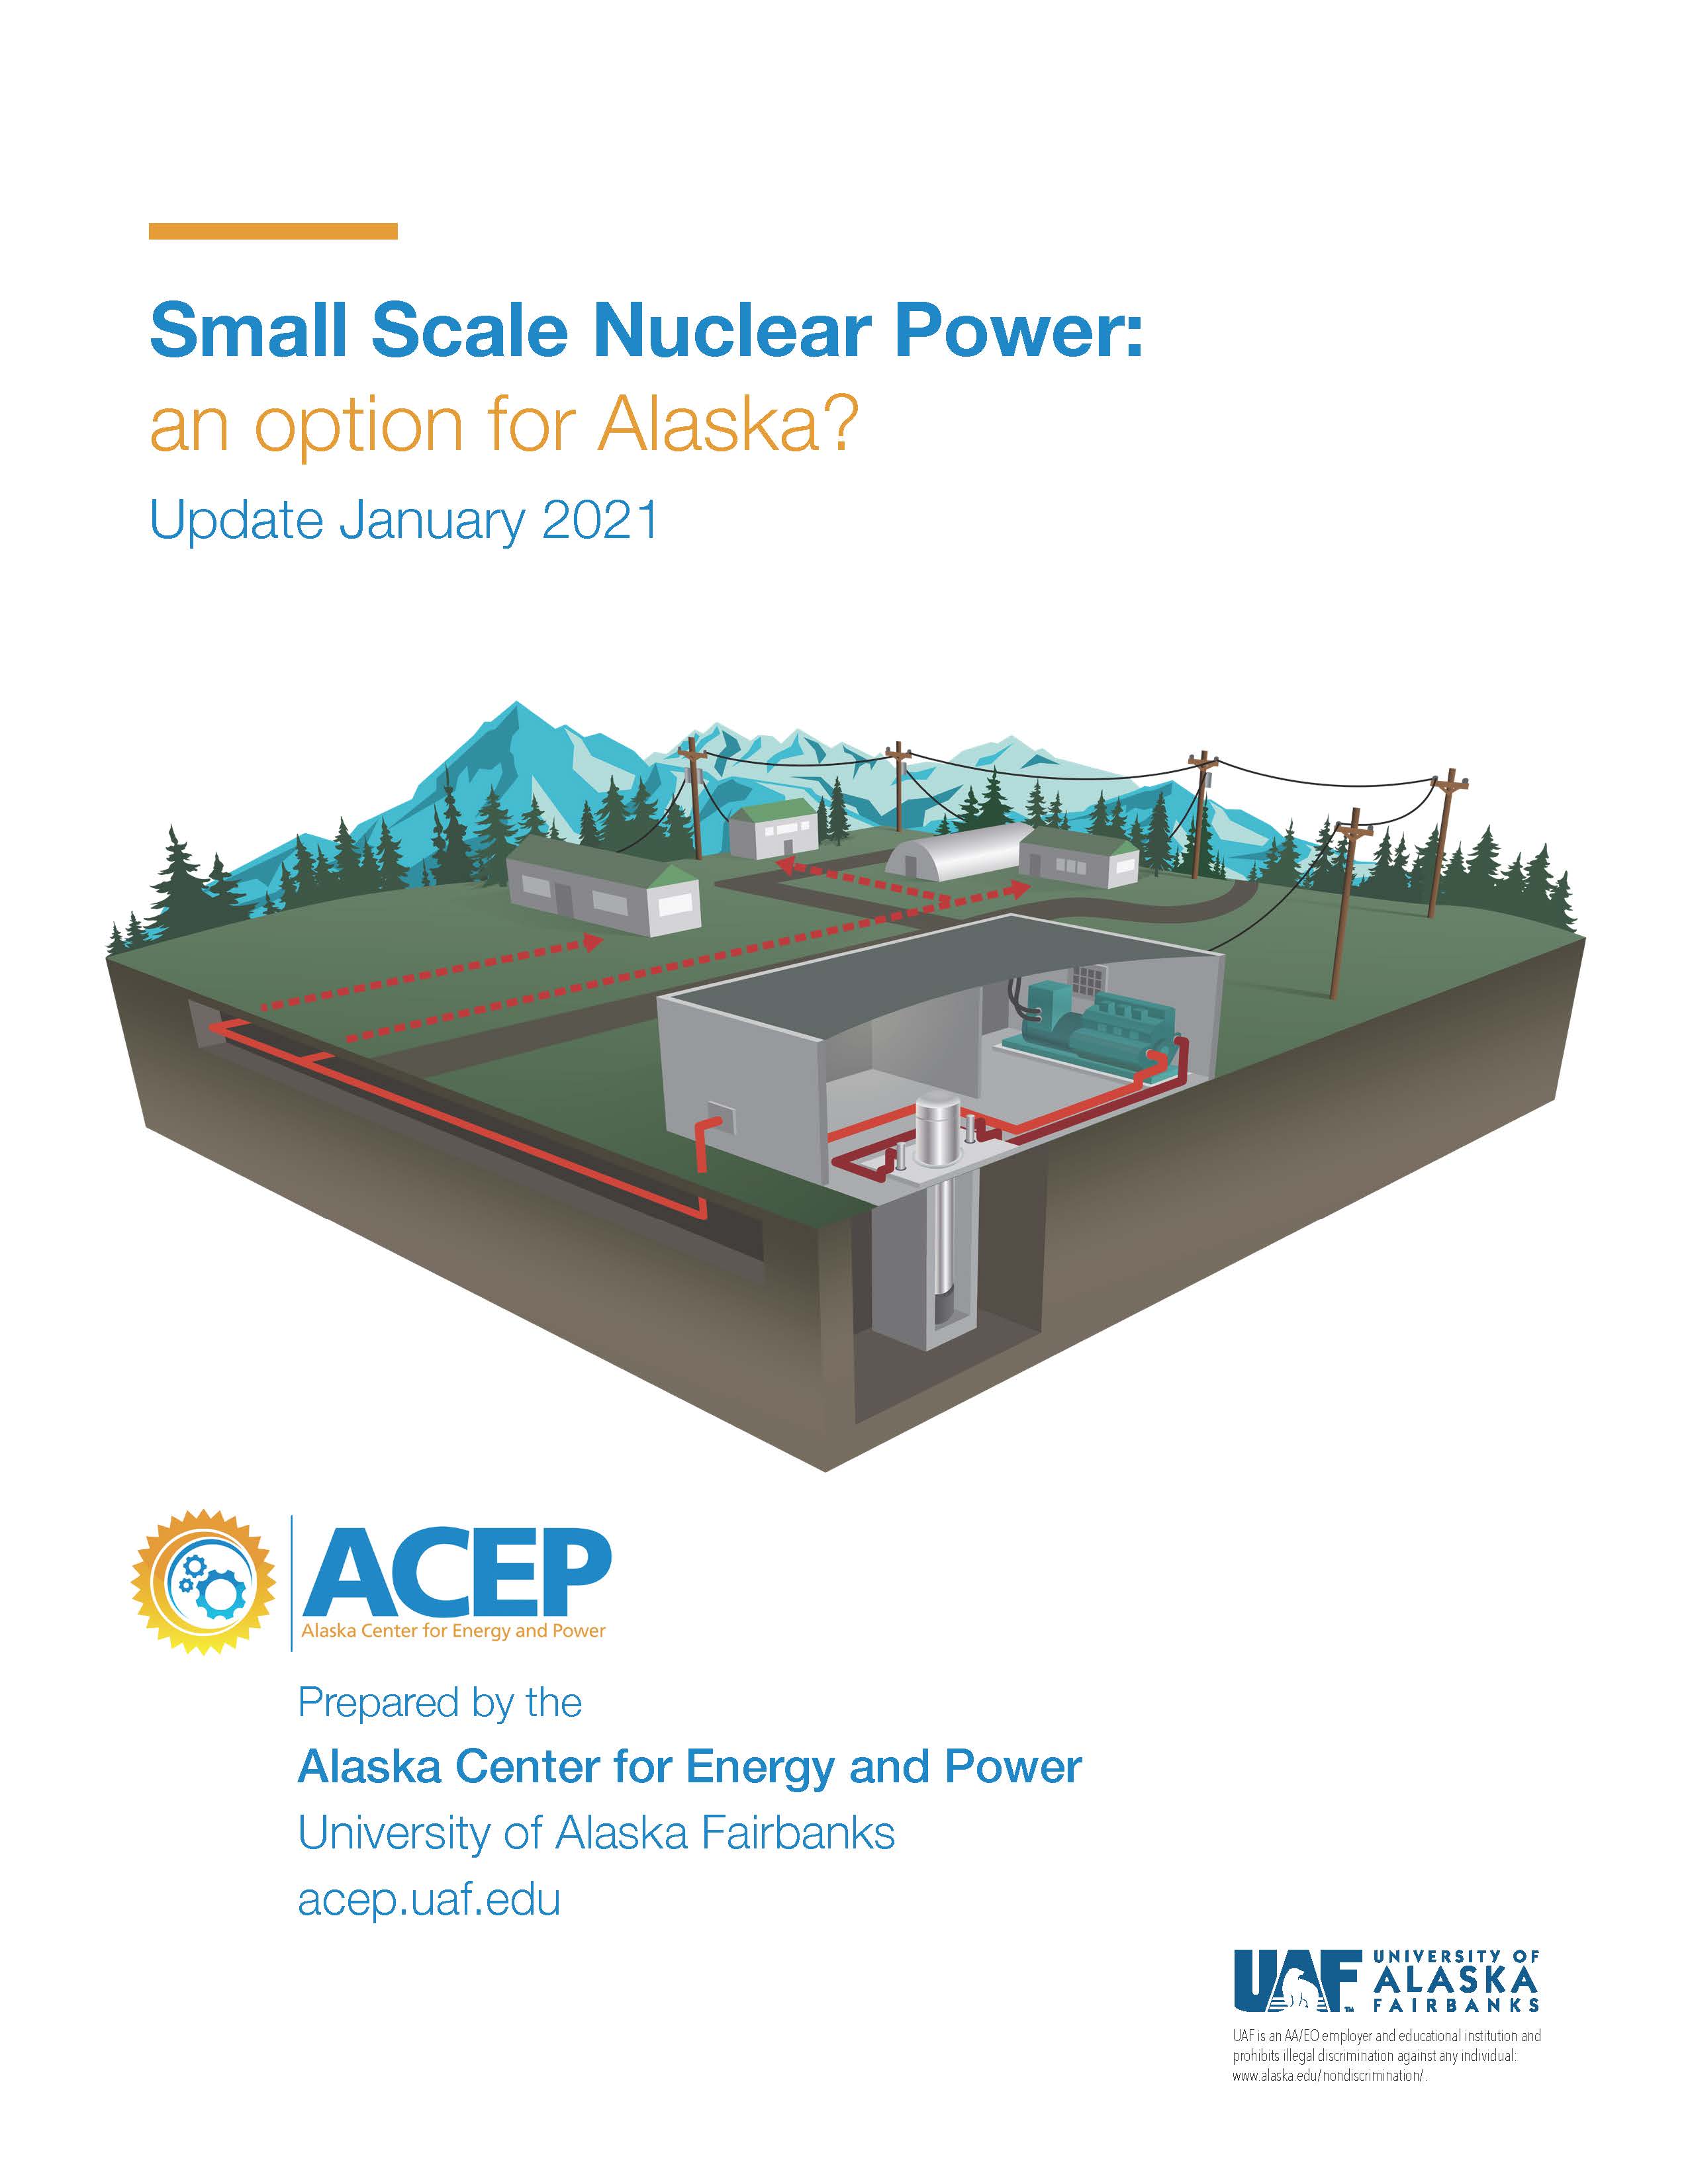 Small-Scale Nuclear Report for Alaska Published